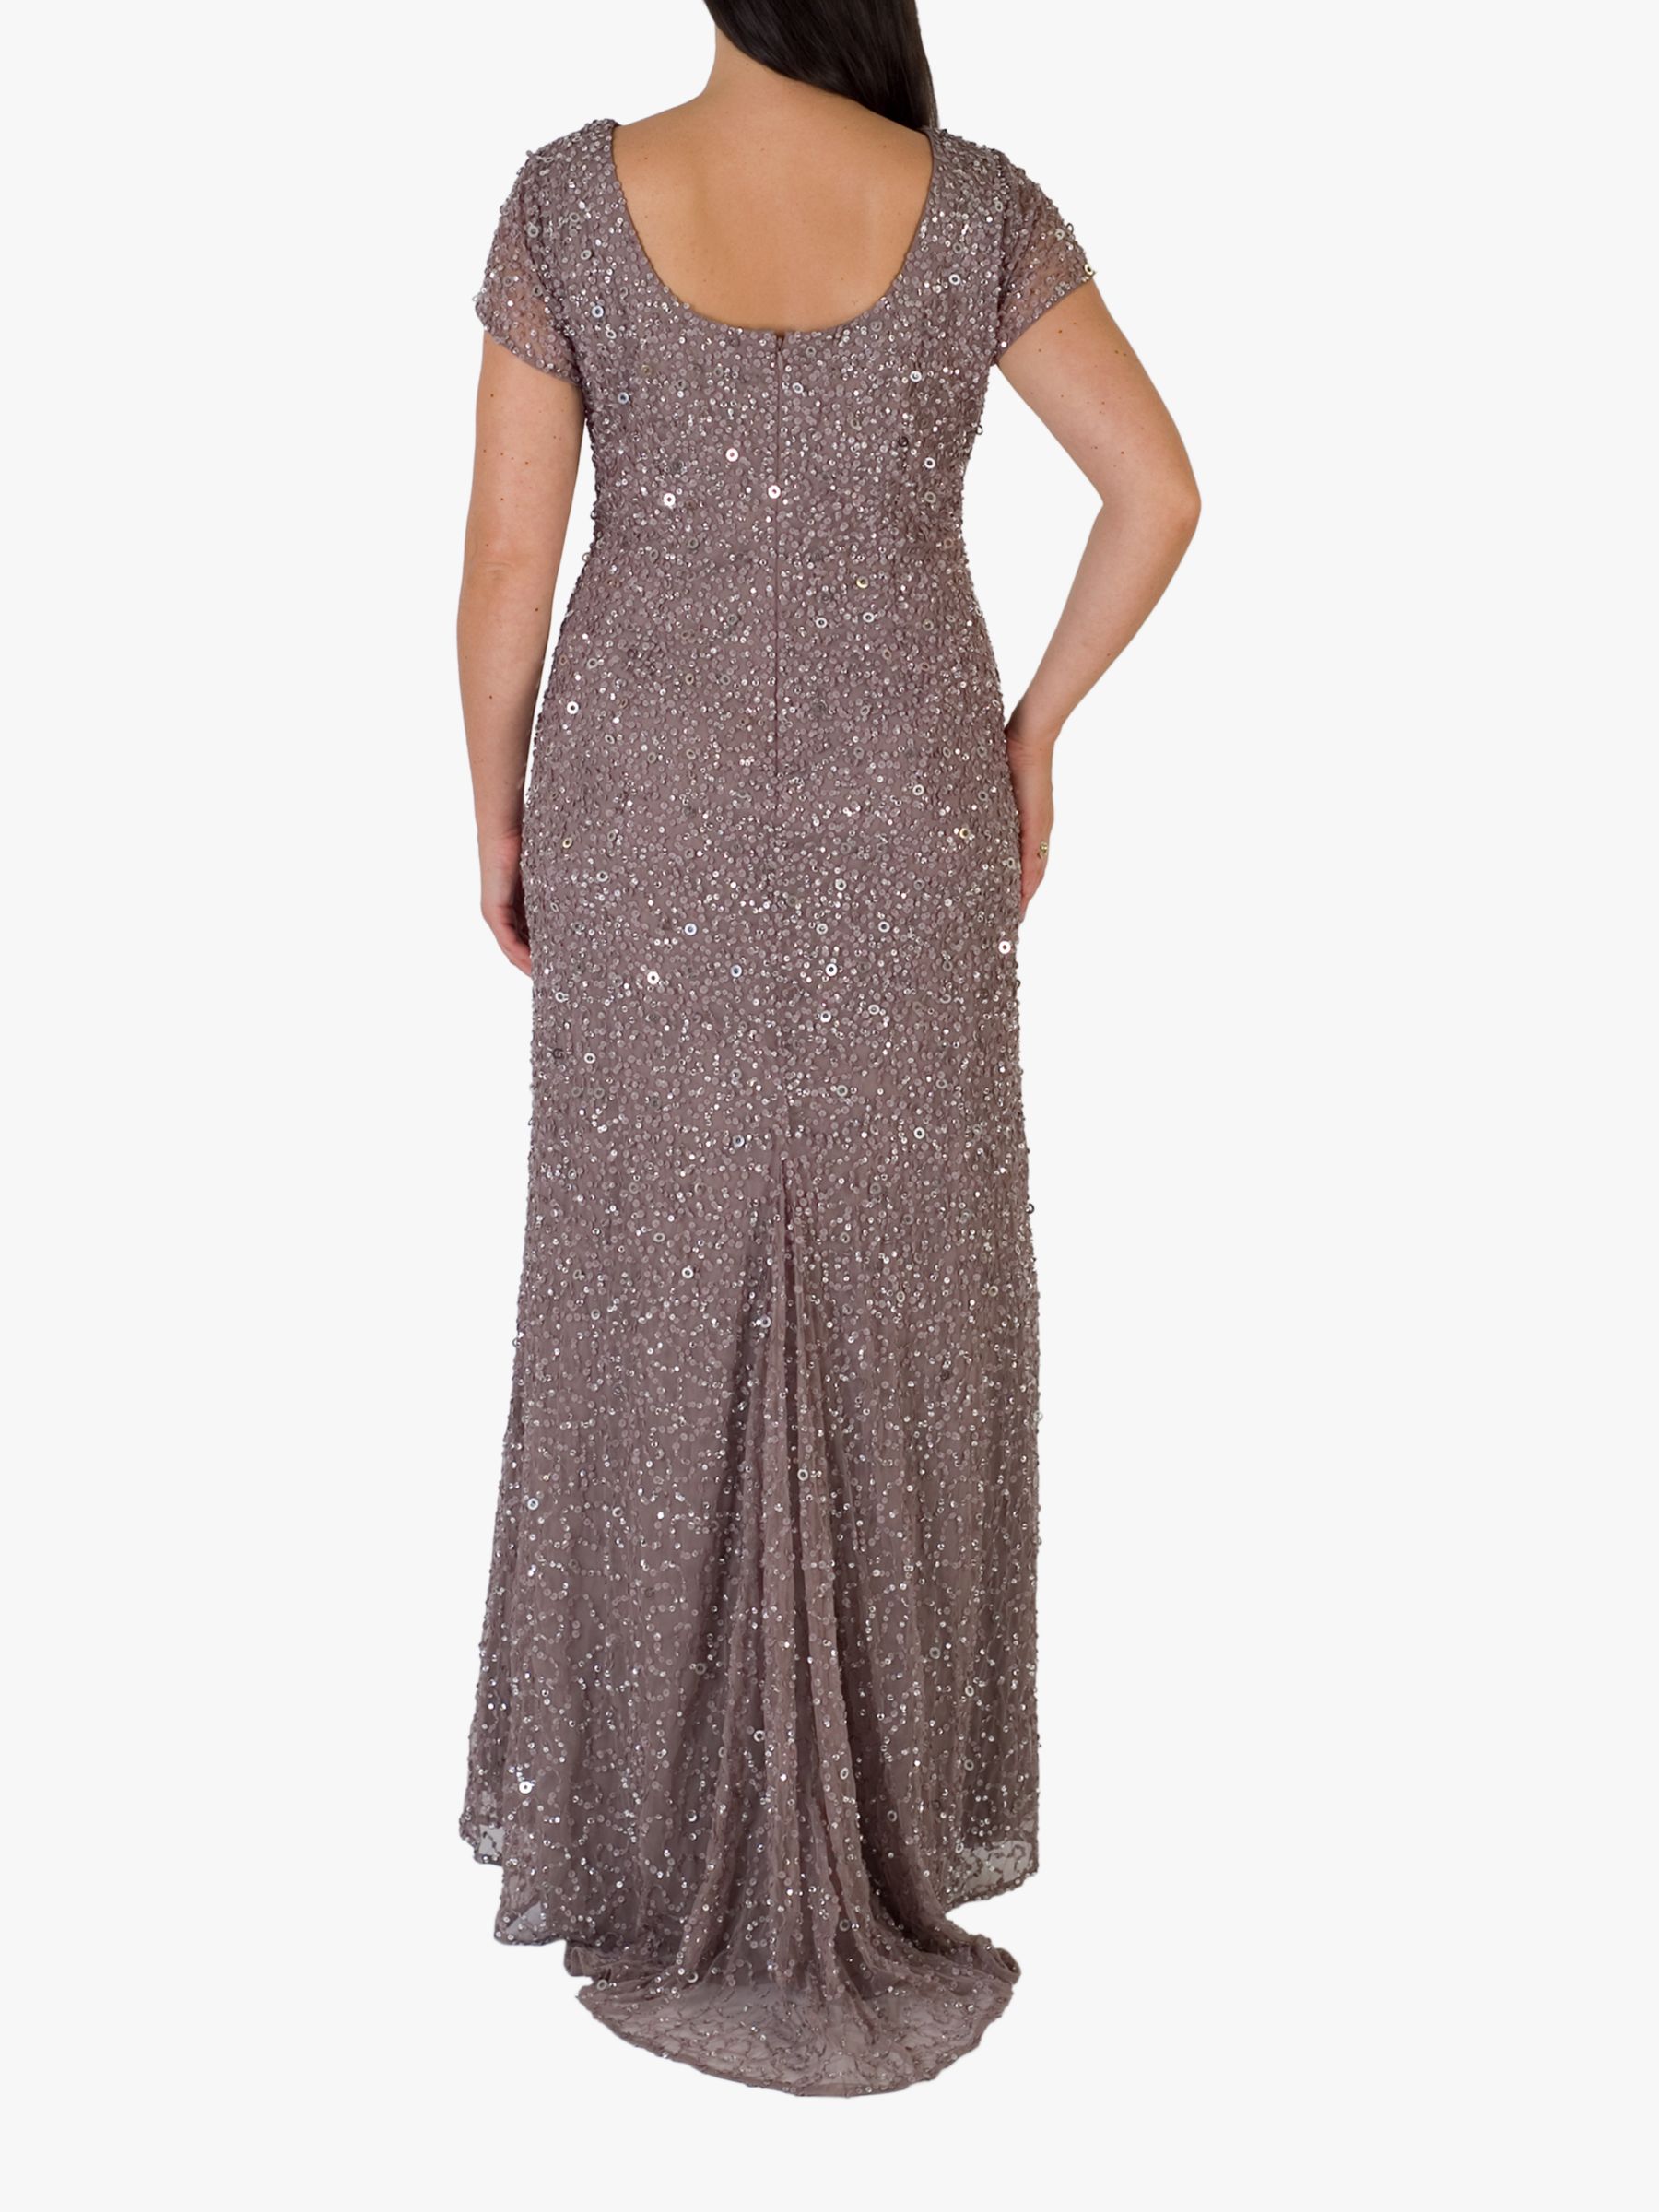 Chesca Short Sleeve Sequin Maxi Dress, Stone at John Lewis & Partners